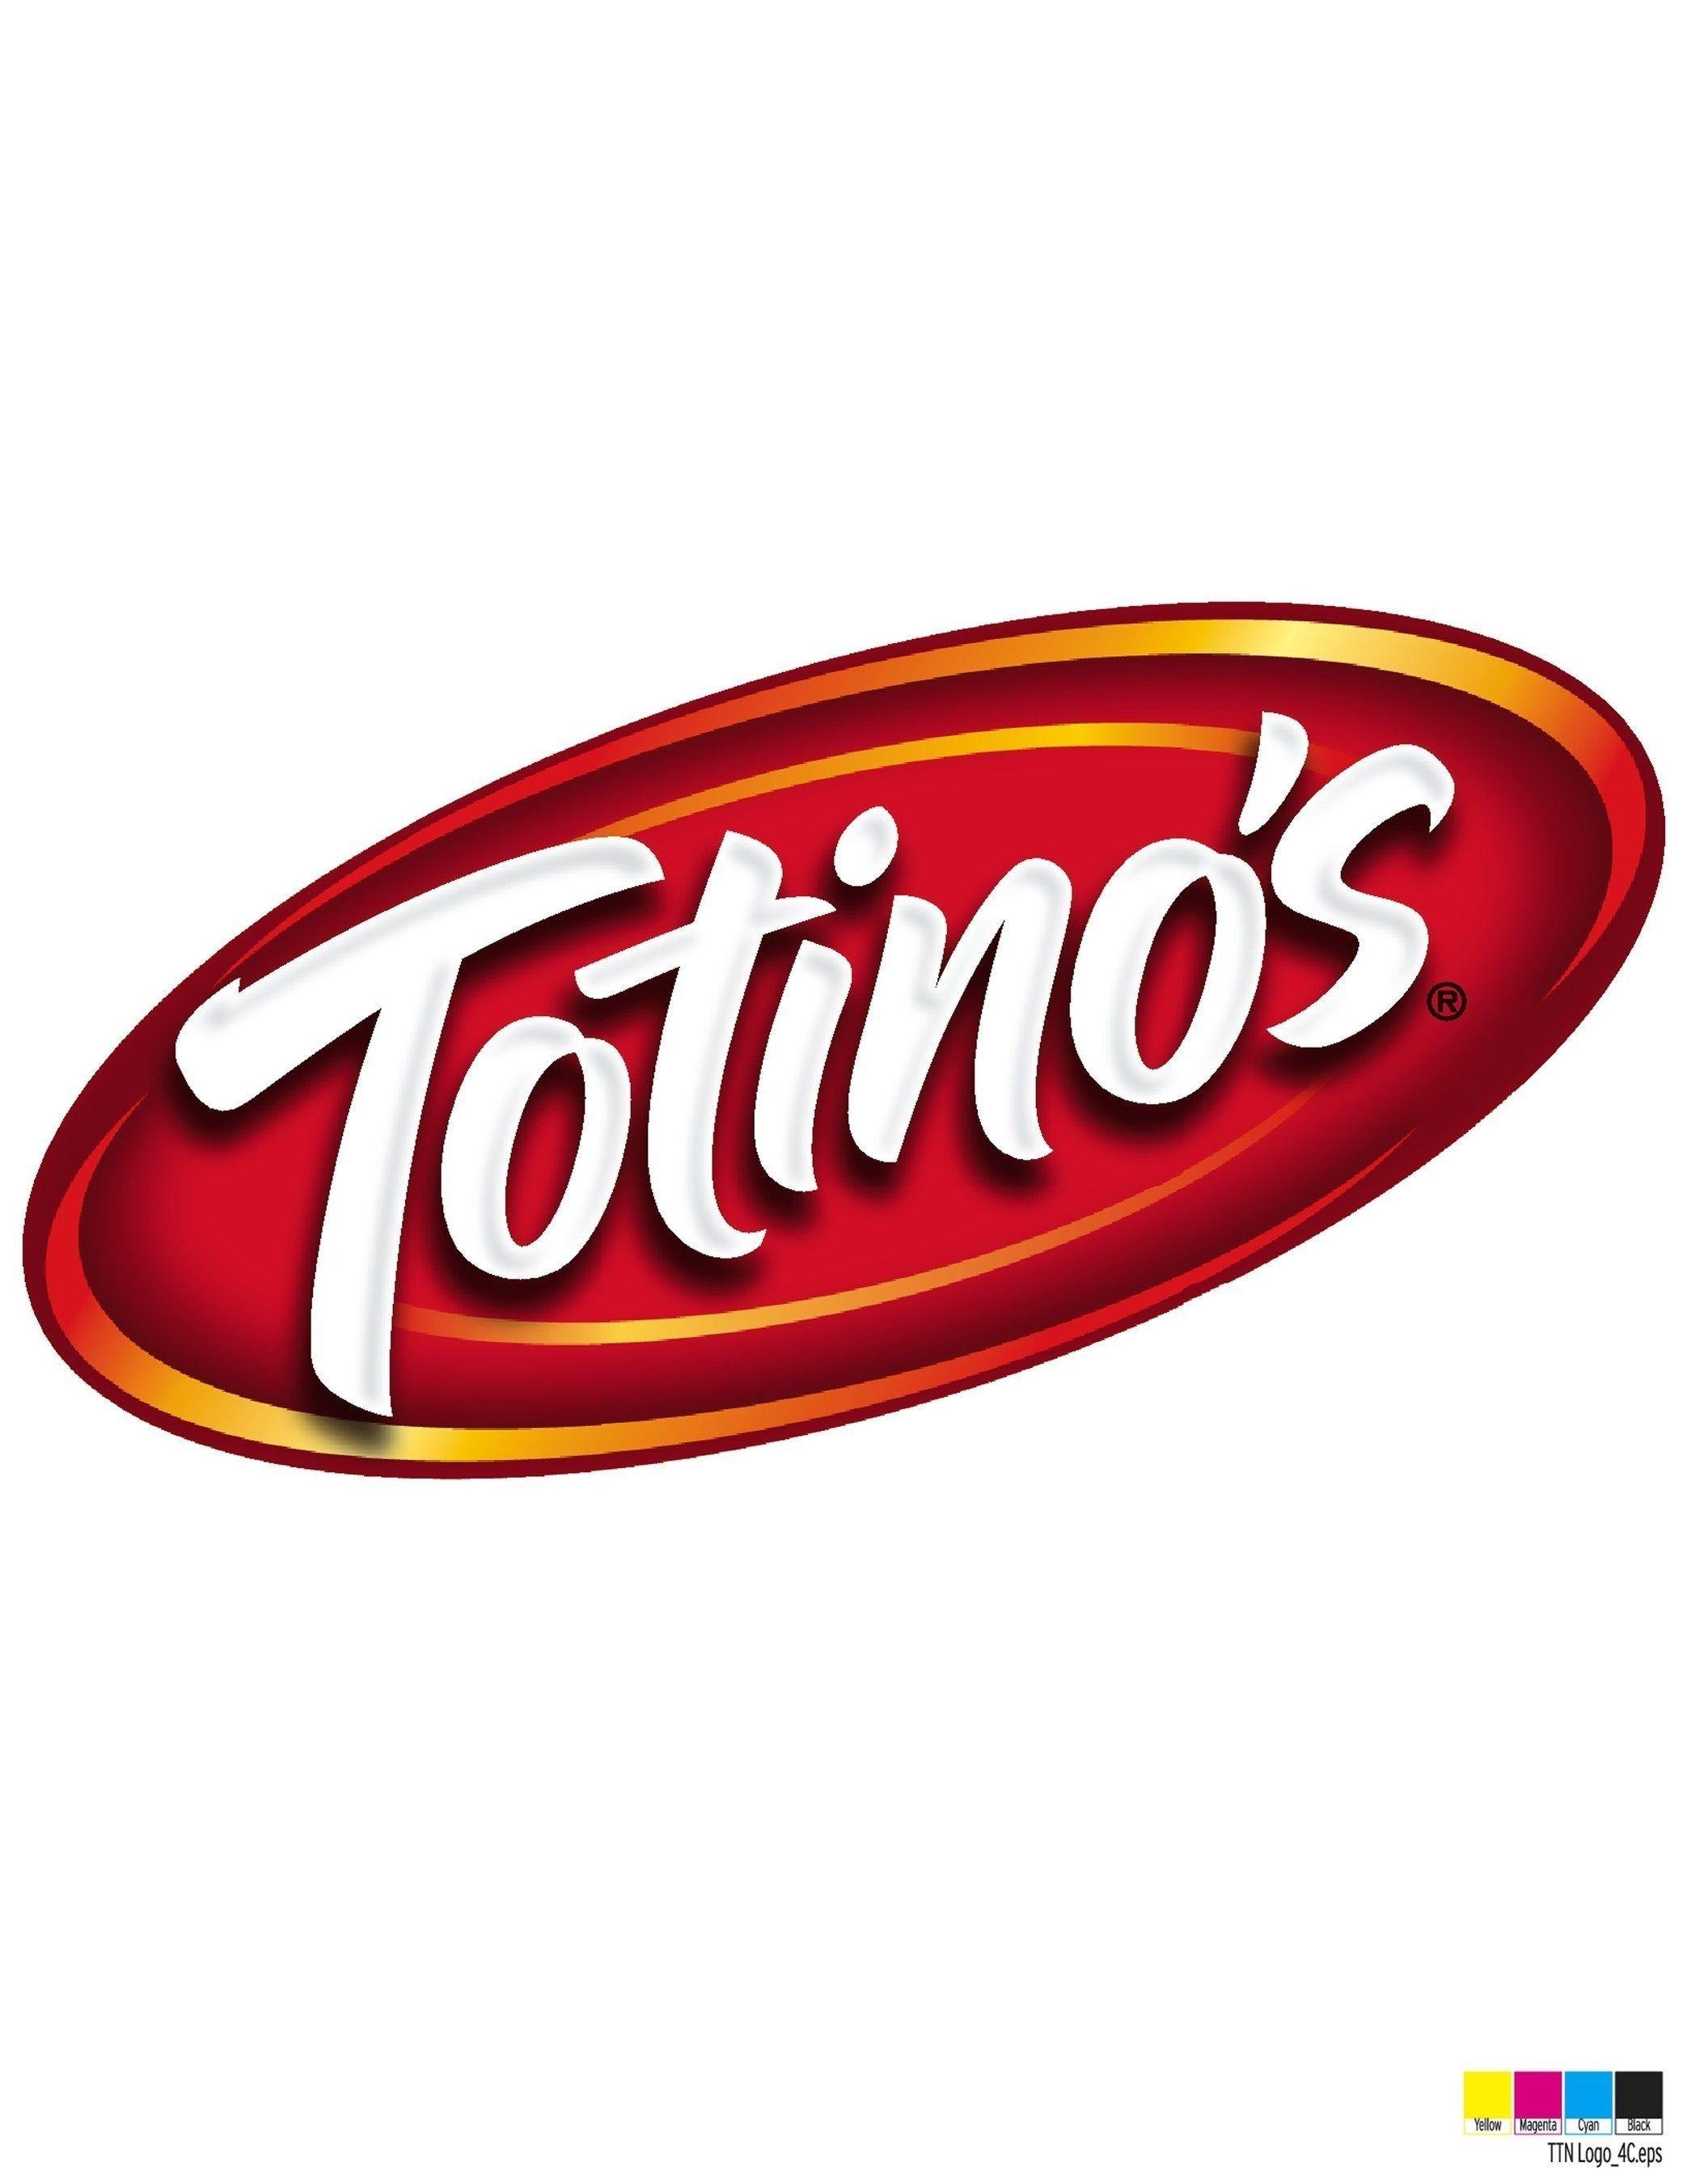 Totino's Logo - Totino's Pizza Rolls™ Brings 'Bucking Couch' Experience to PAX East Expo